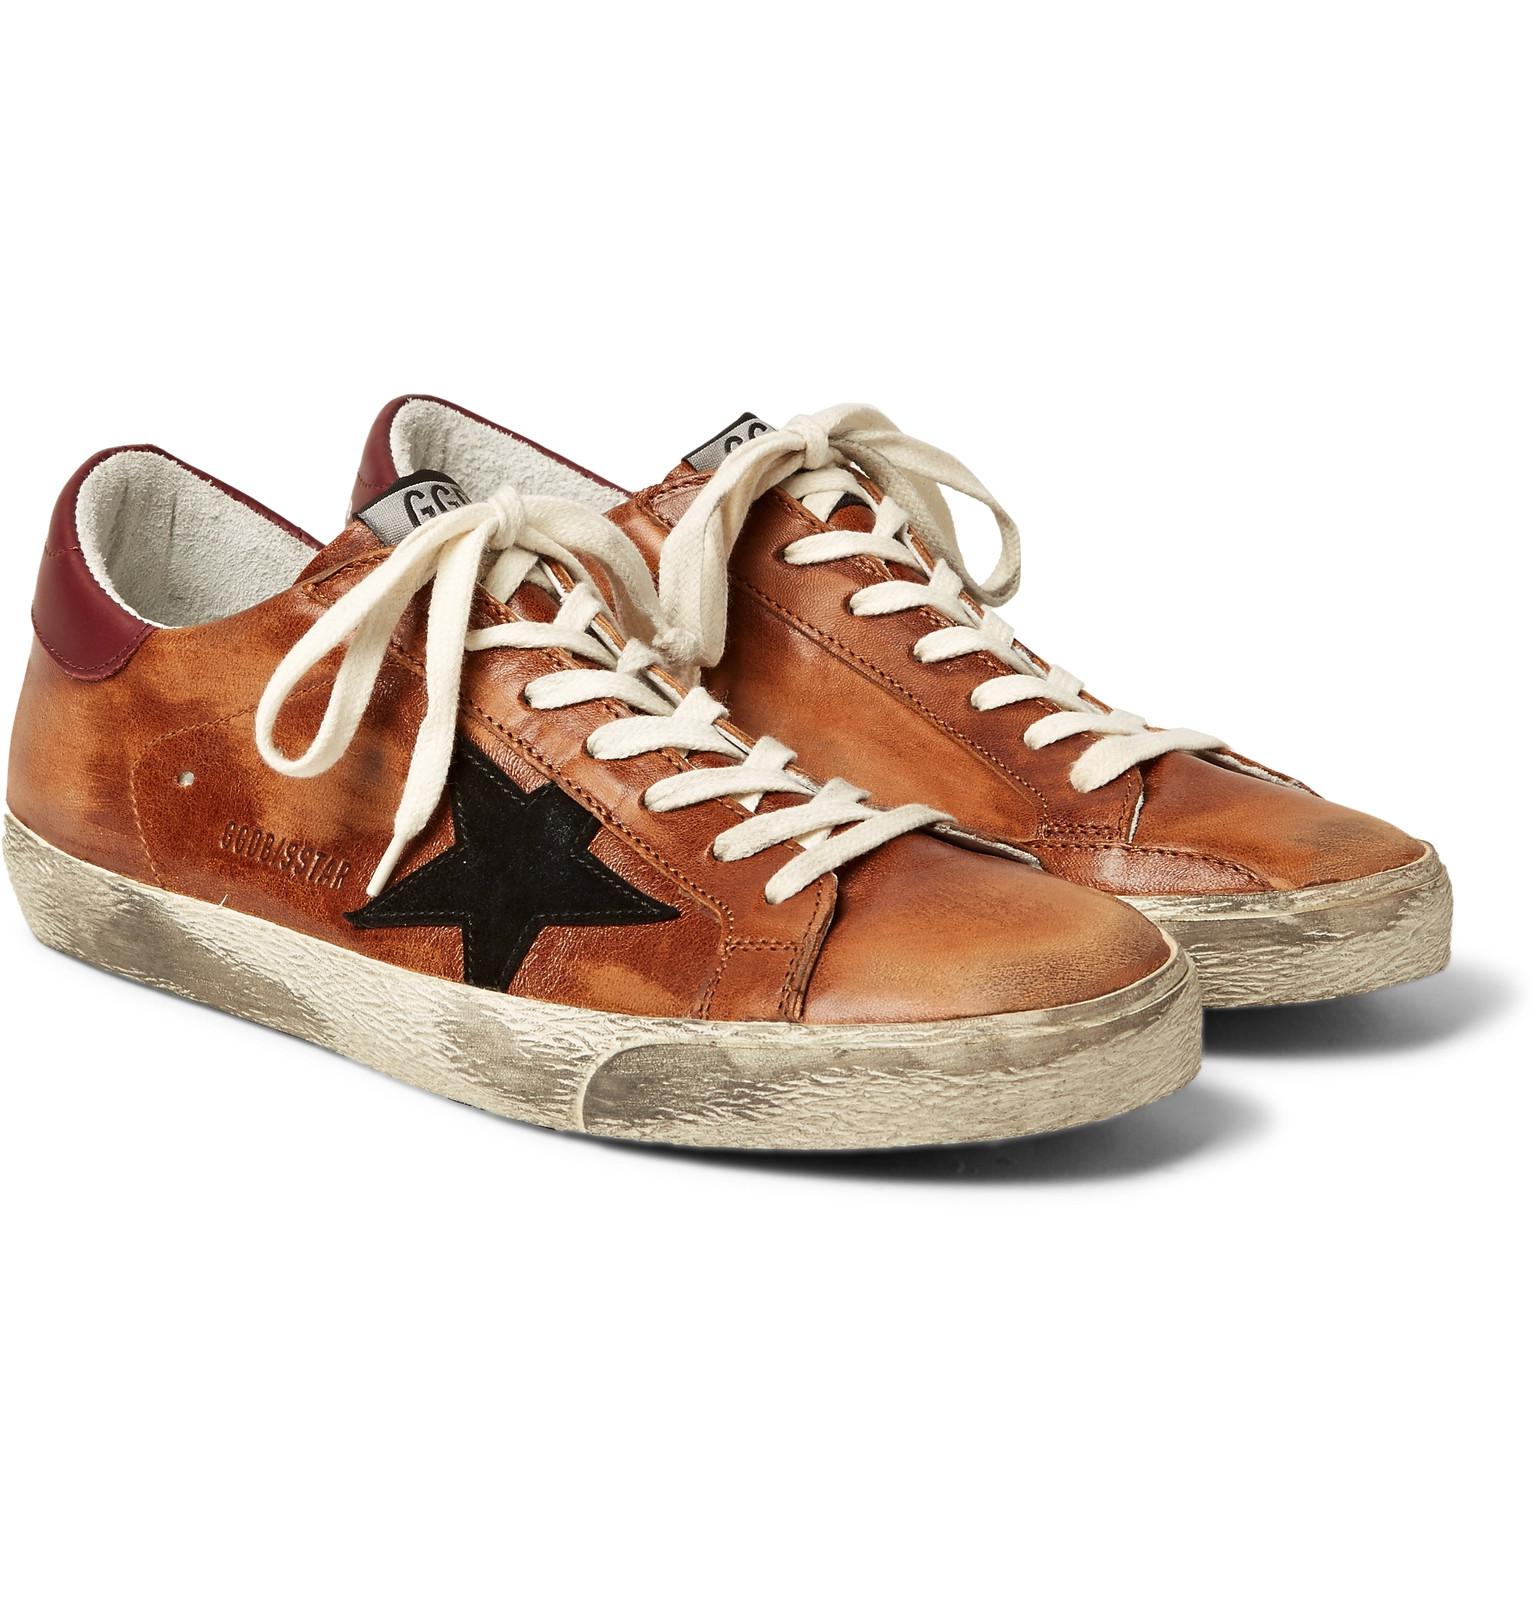 Sale > non distressed golden goose > in stock